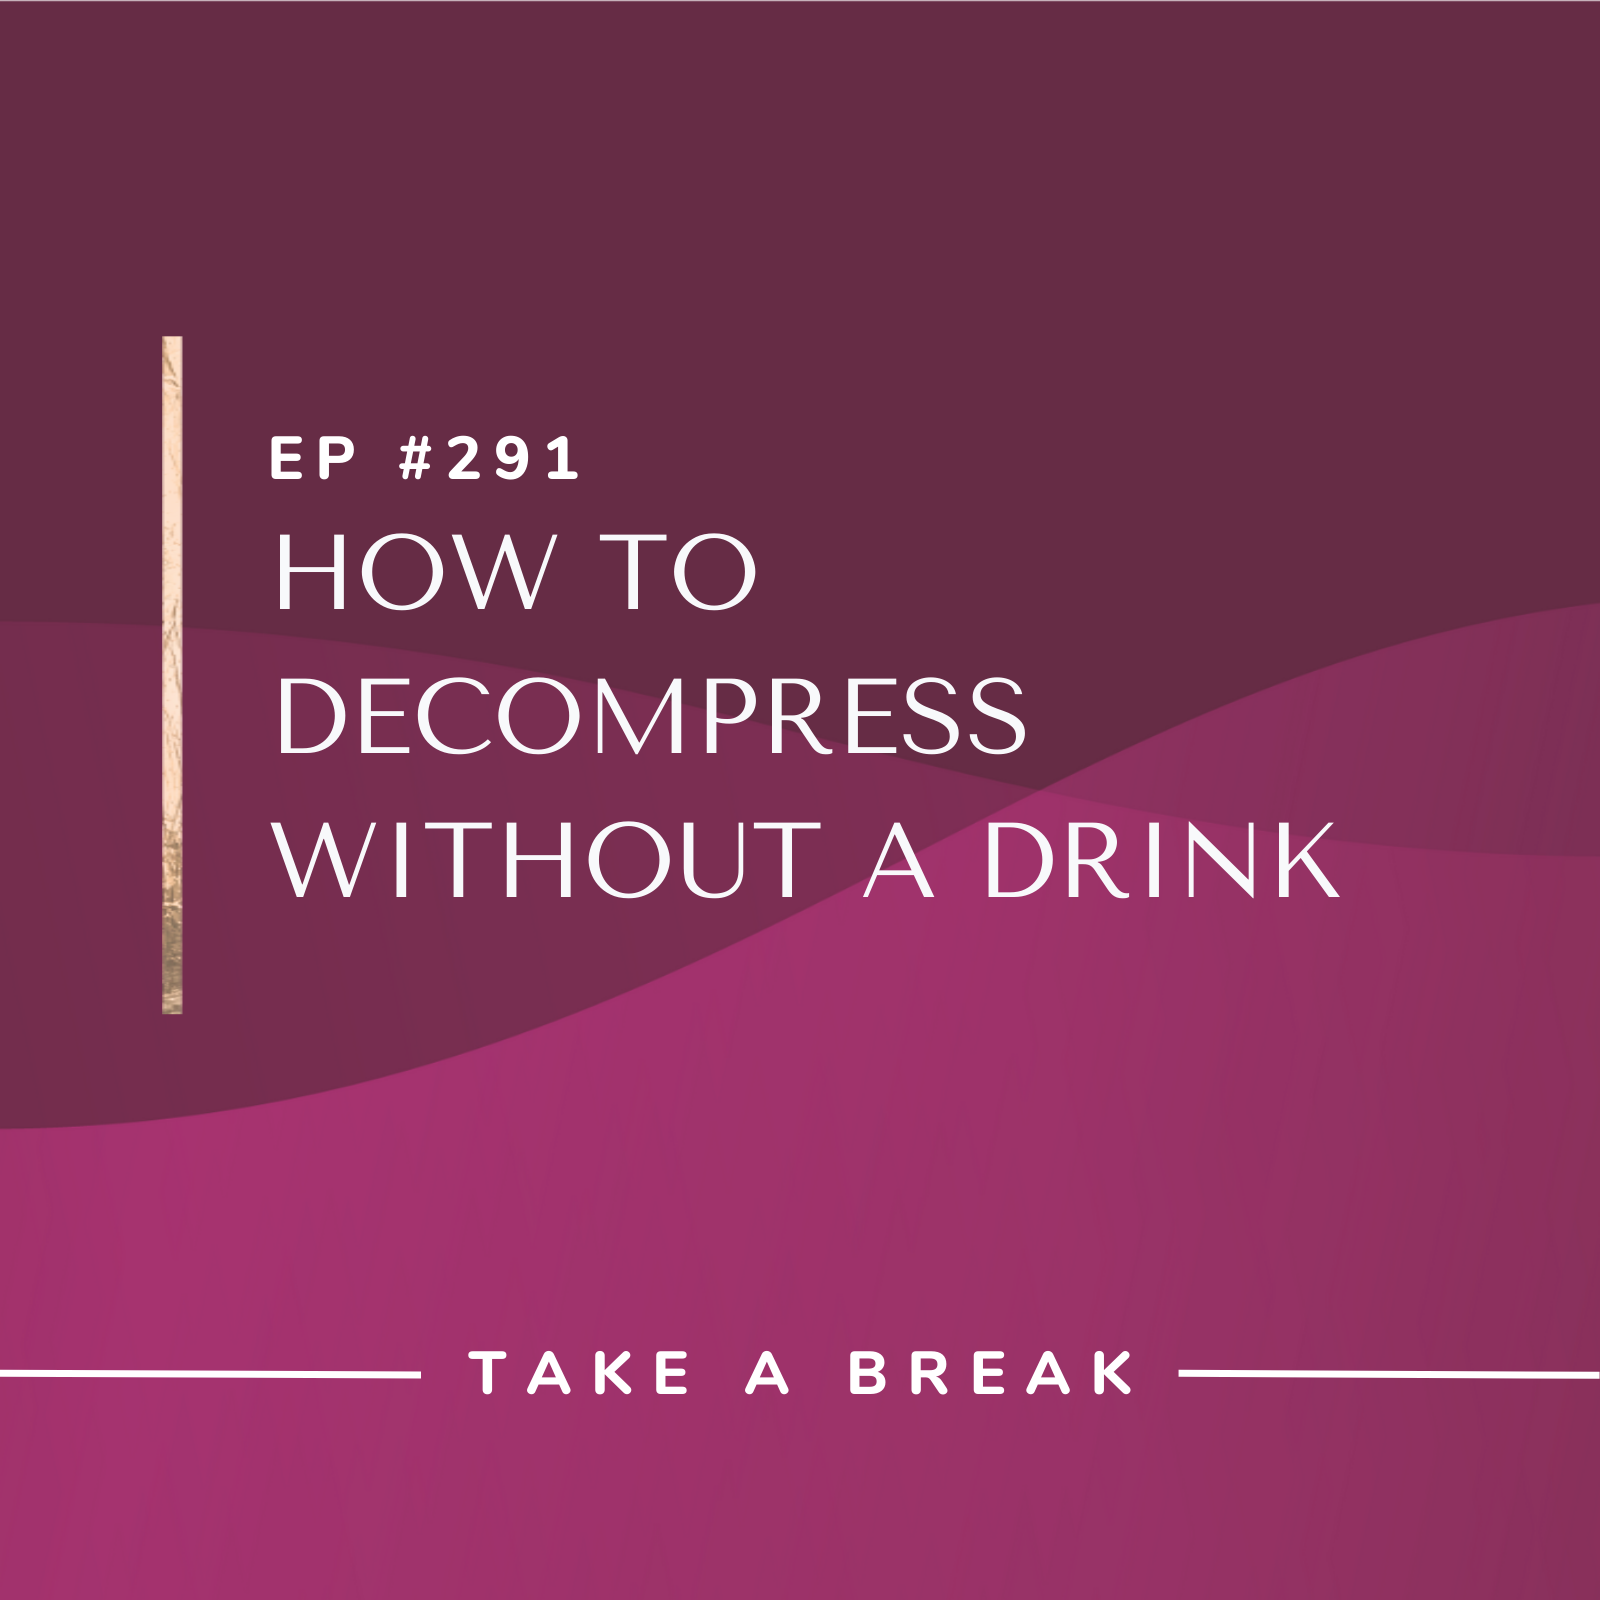 Take A Break from Drinking How to Decompress Without a Drink